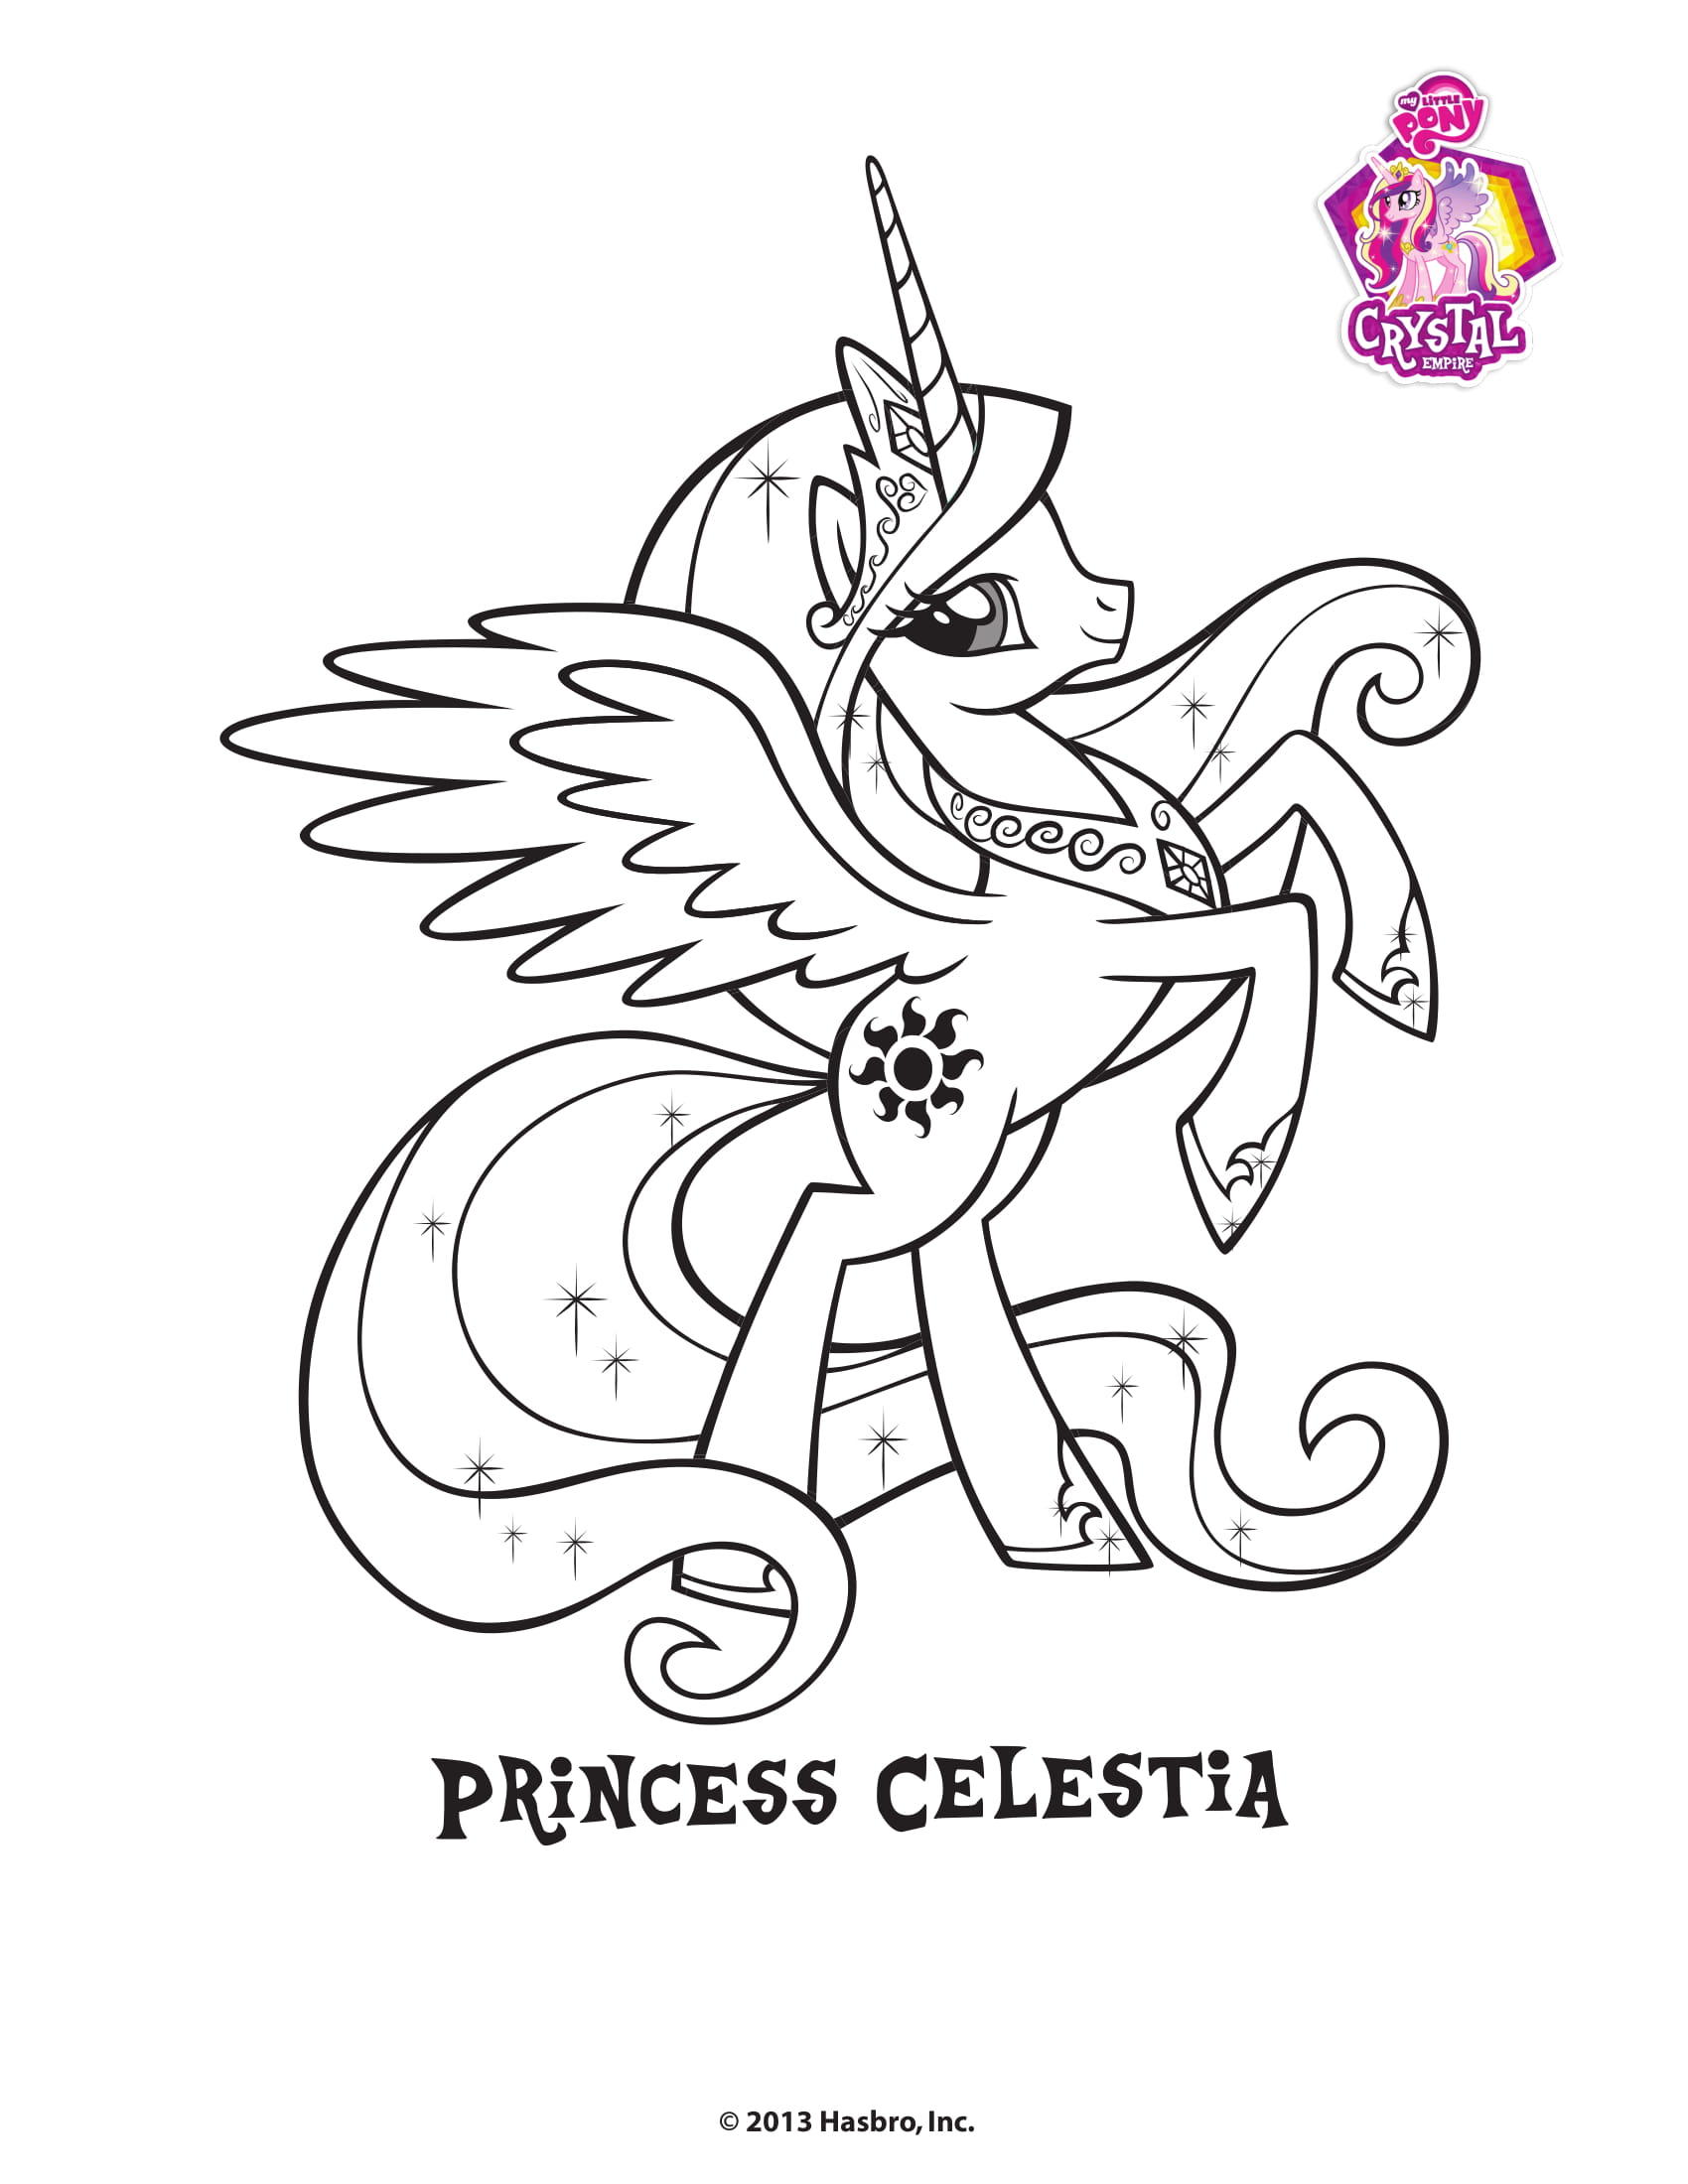 Princess Celestra Crystal Empire My Little Pony Coloring Page